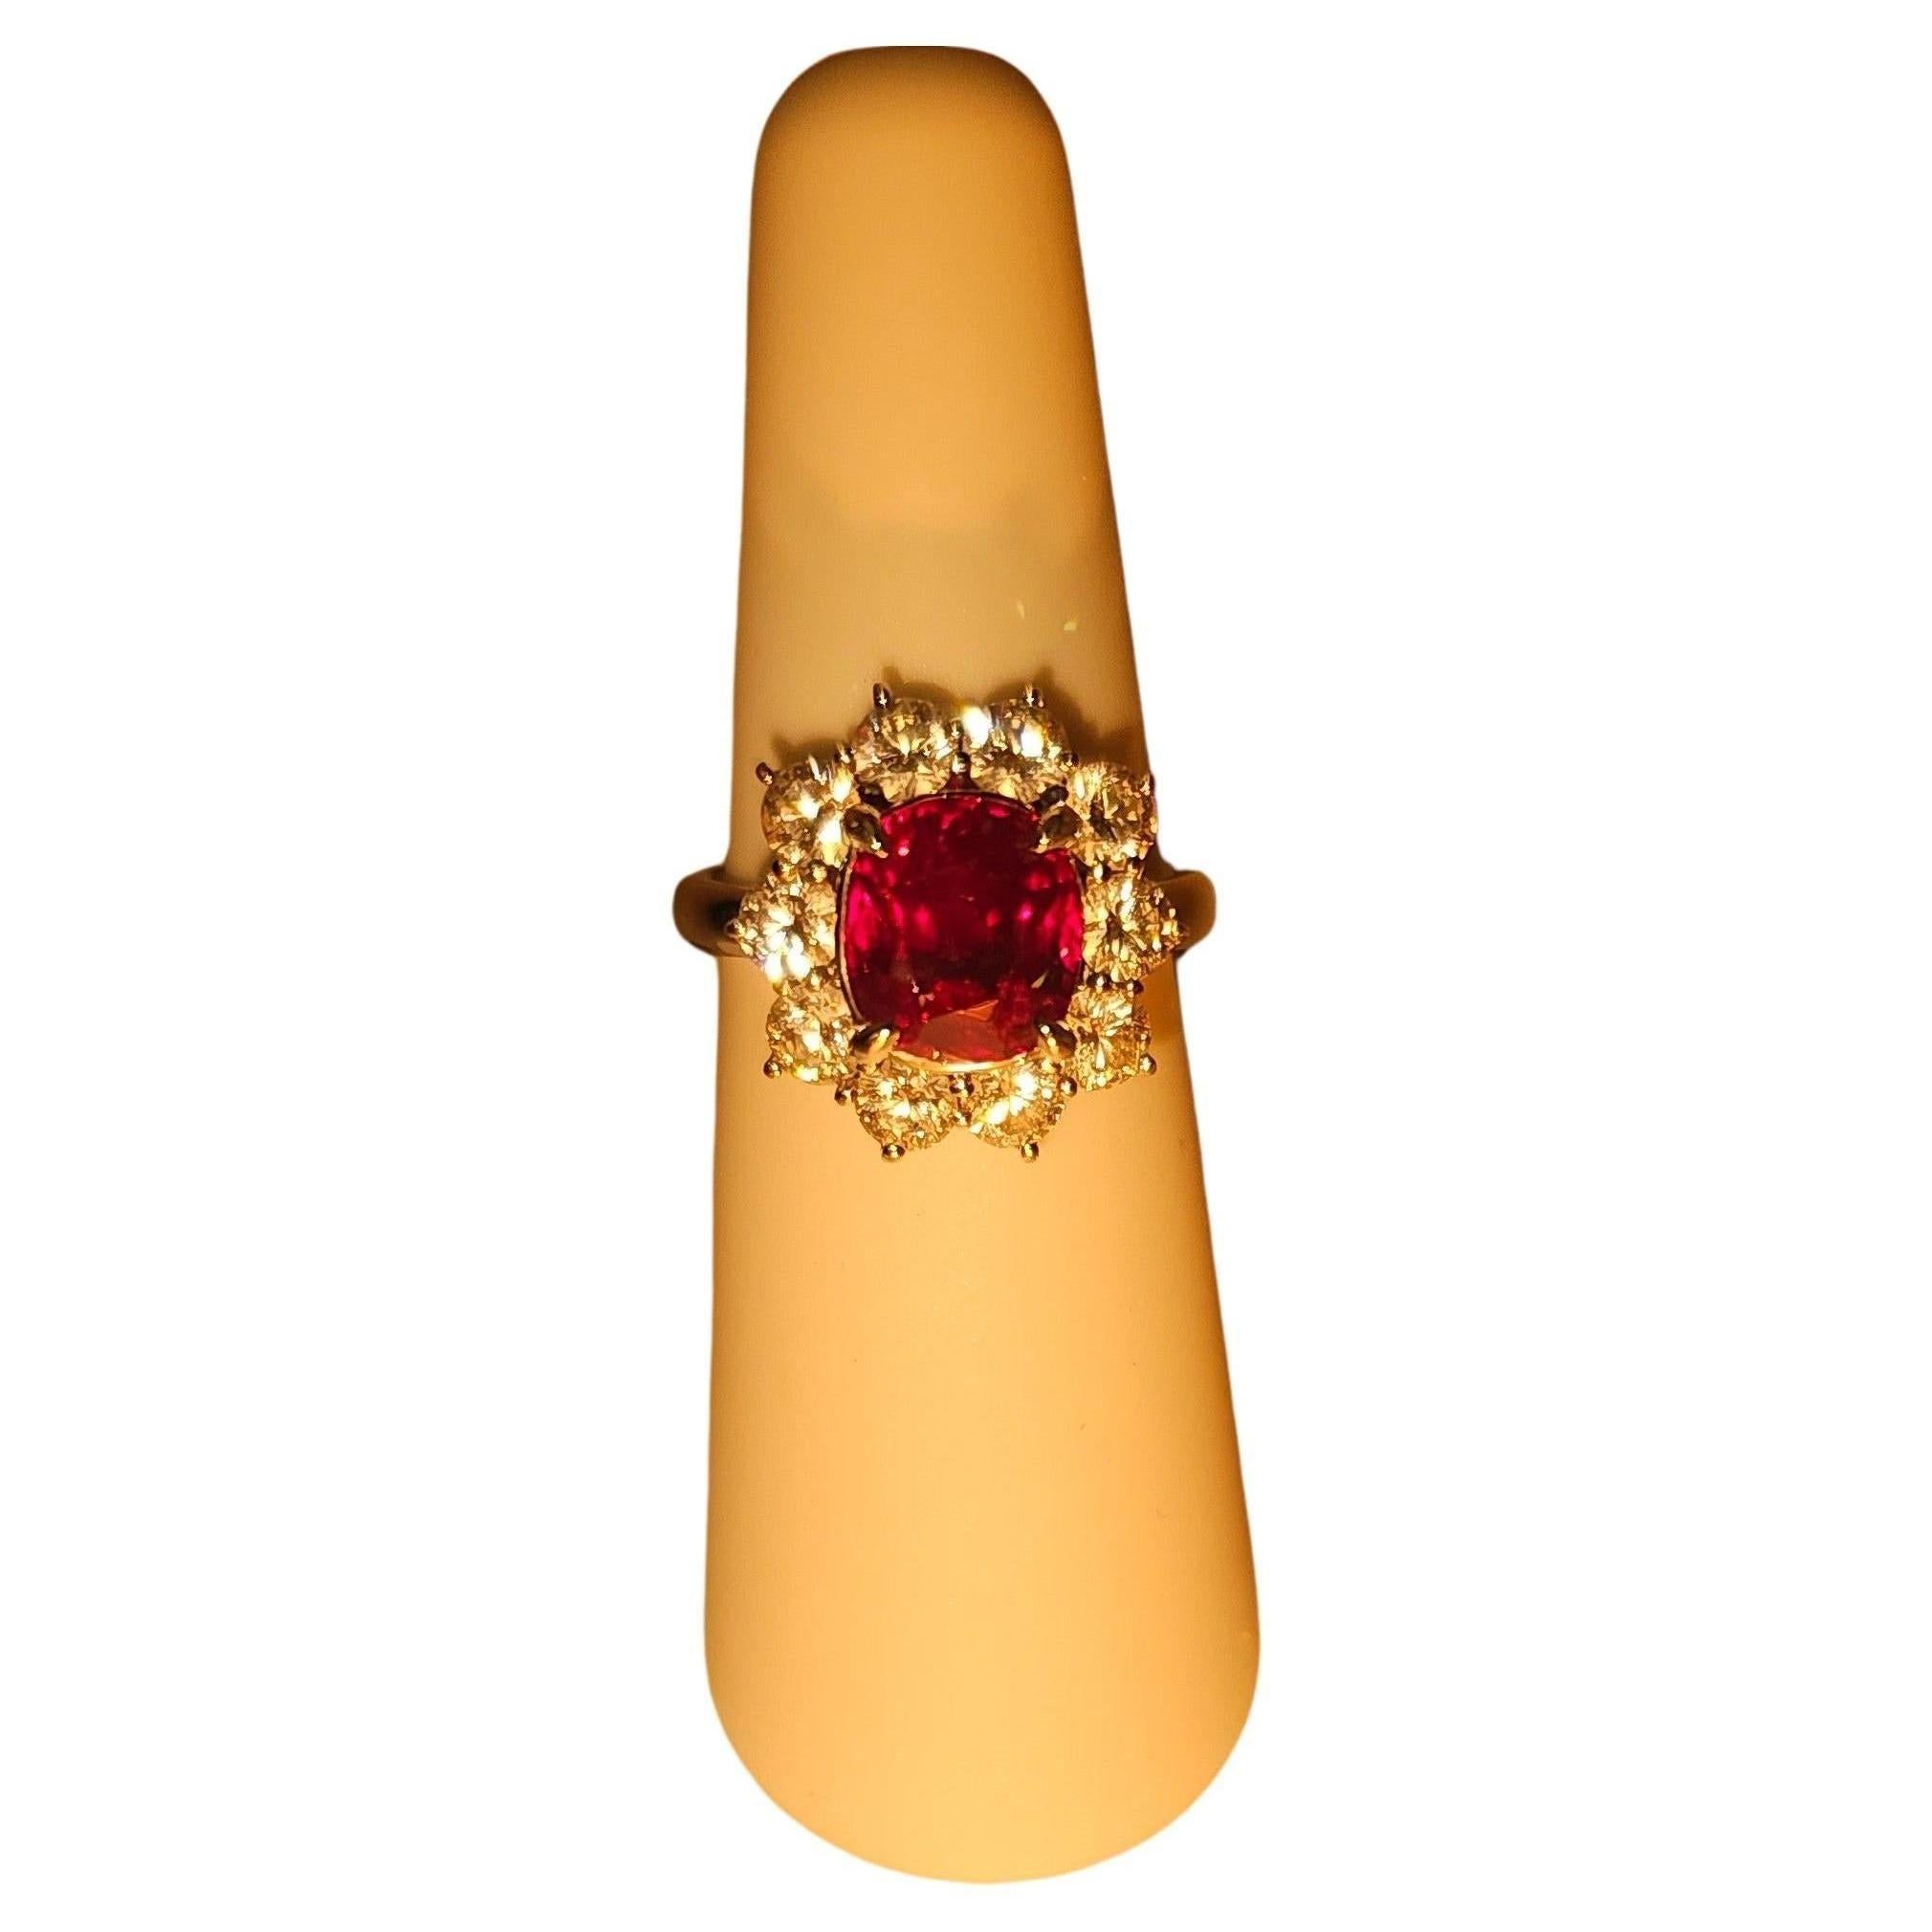 One of a kind! Rare Gorgeous Unheated Intense Vivid Pure Red Color Burmese  Ruby Ring. Clean and Brilliant 4.542 CT. Ruby Ring in Platinum.  The Ruby IS DIRECTLY FROM MOGOK, Myanmar (Burma). 
Certain Testing Laboratories call such Red Color of